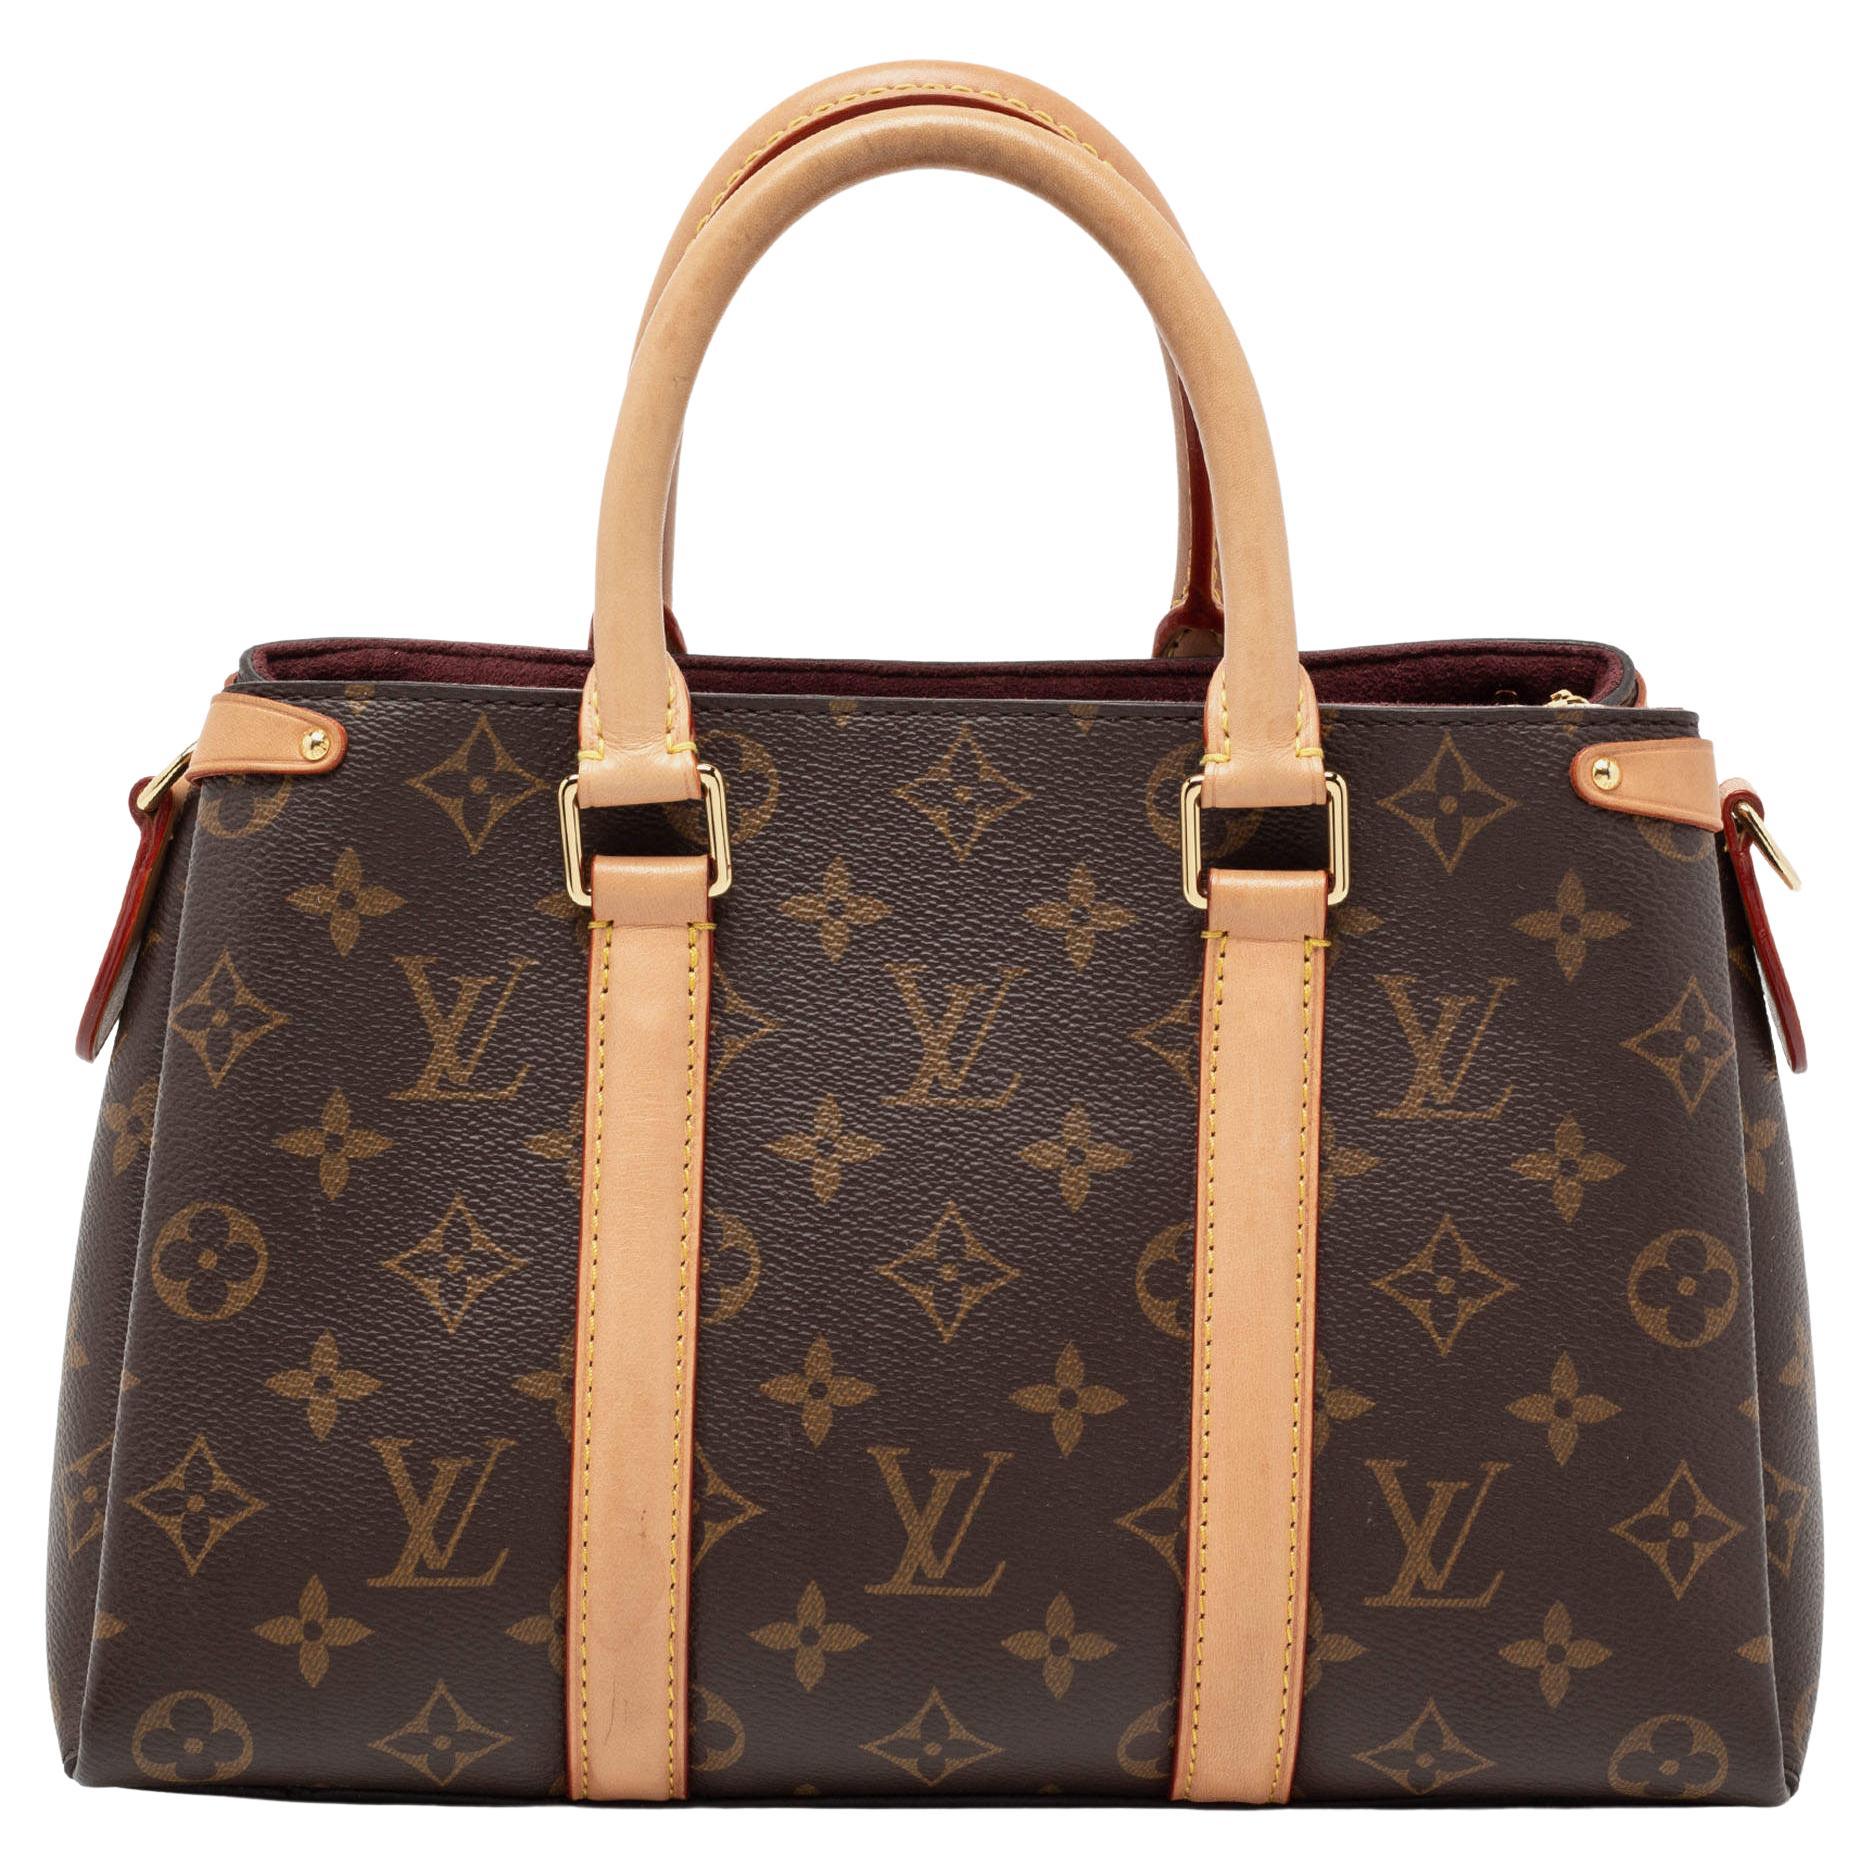 LOUIS VUITTON Bag Hierarchy  From Canvas to Capucines 